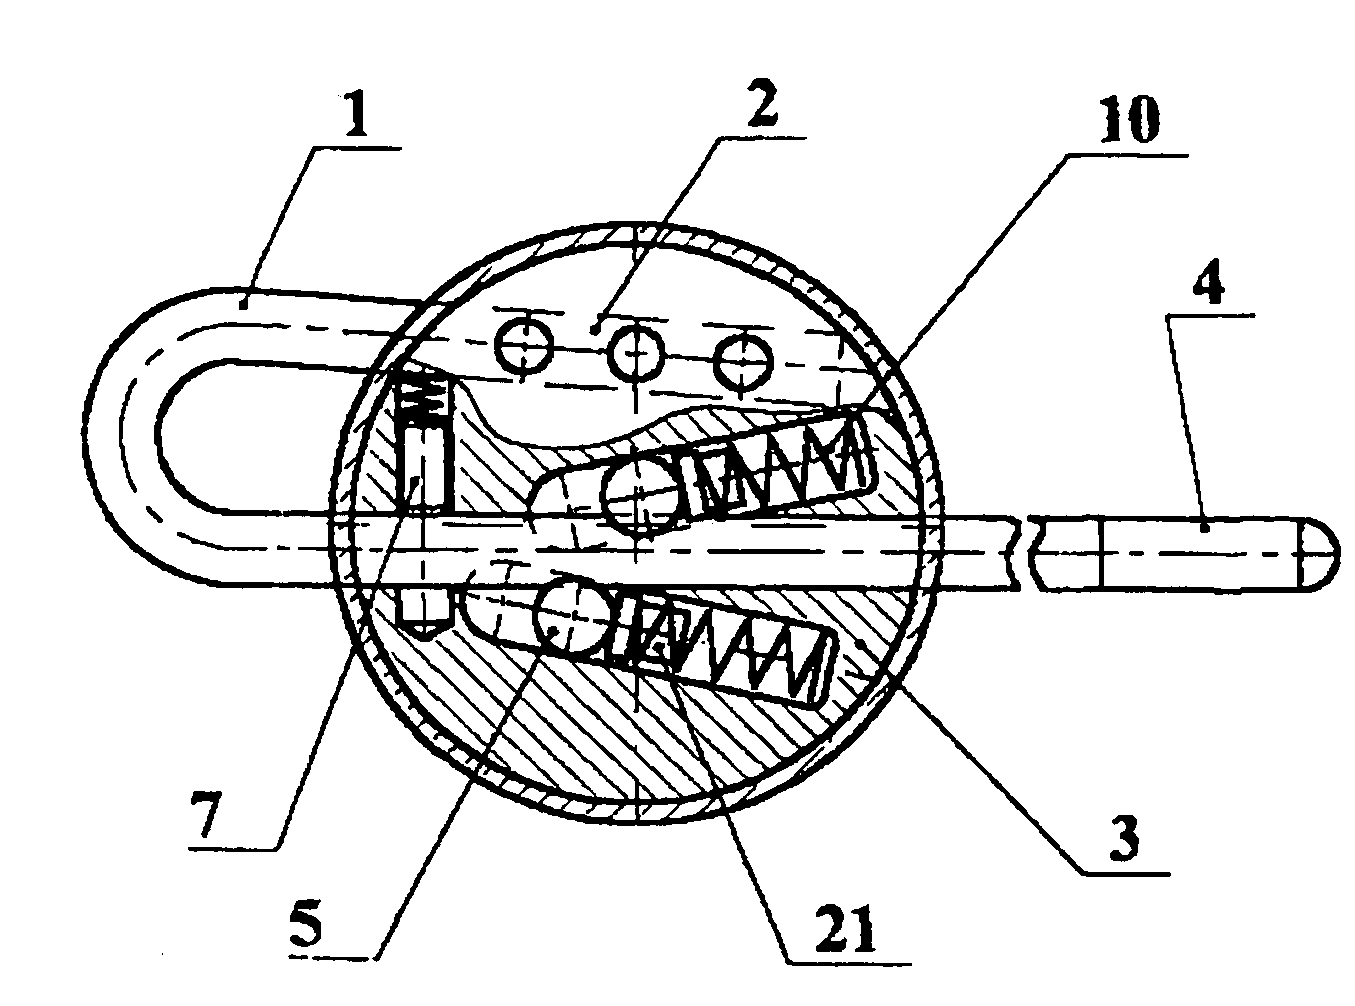 Flexible locking and sealing device